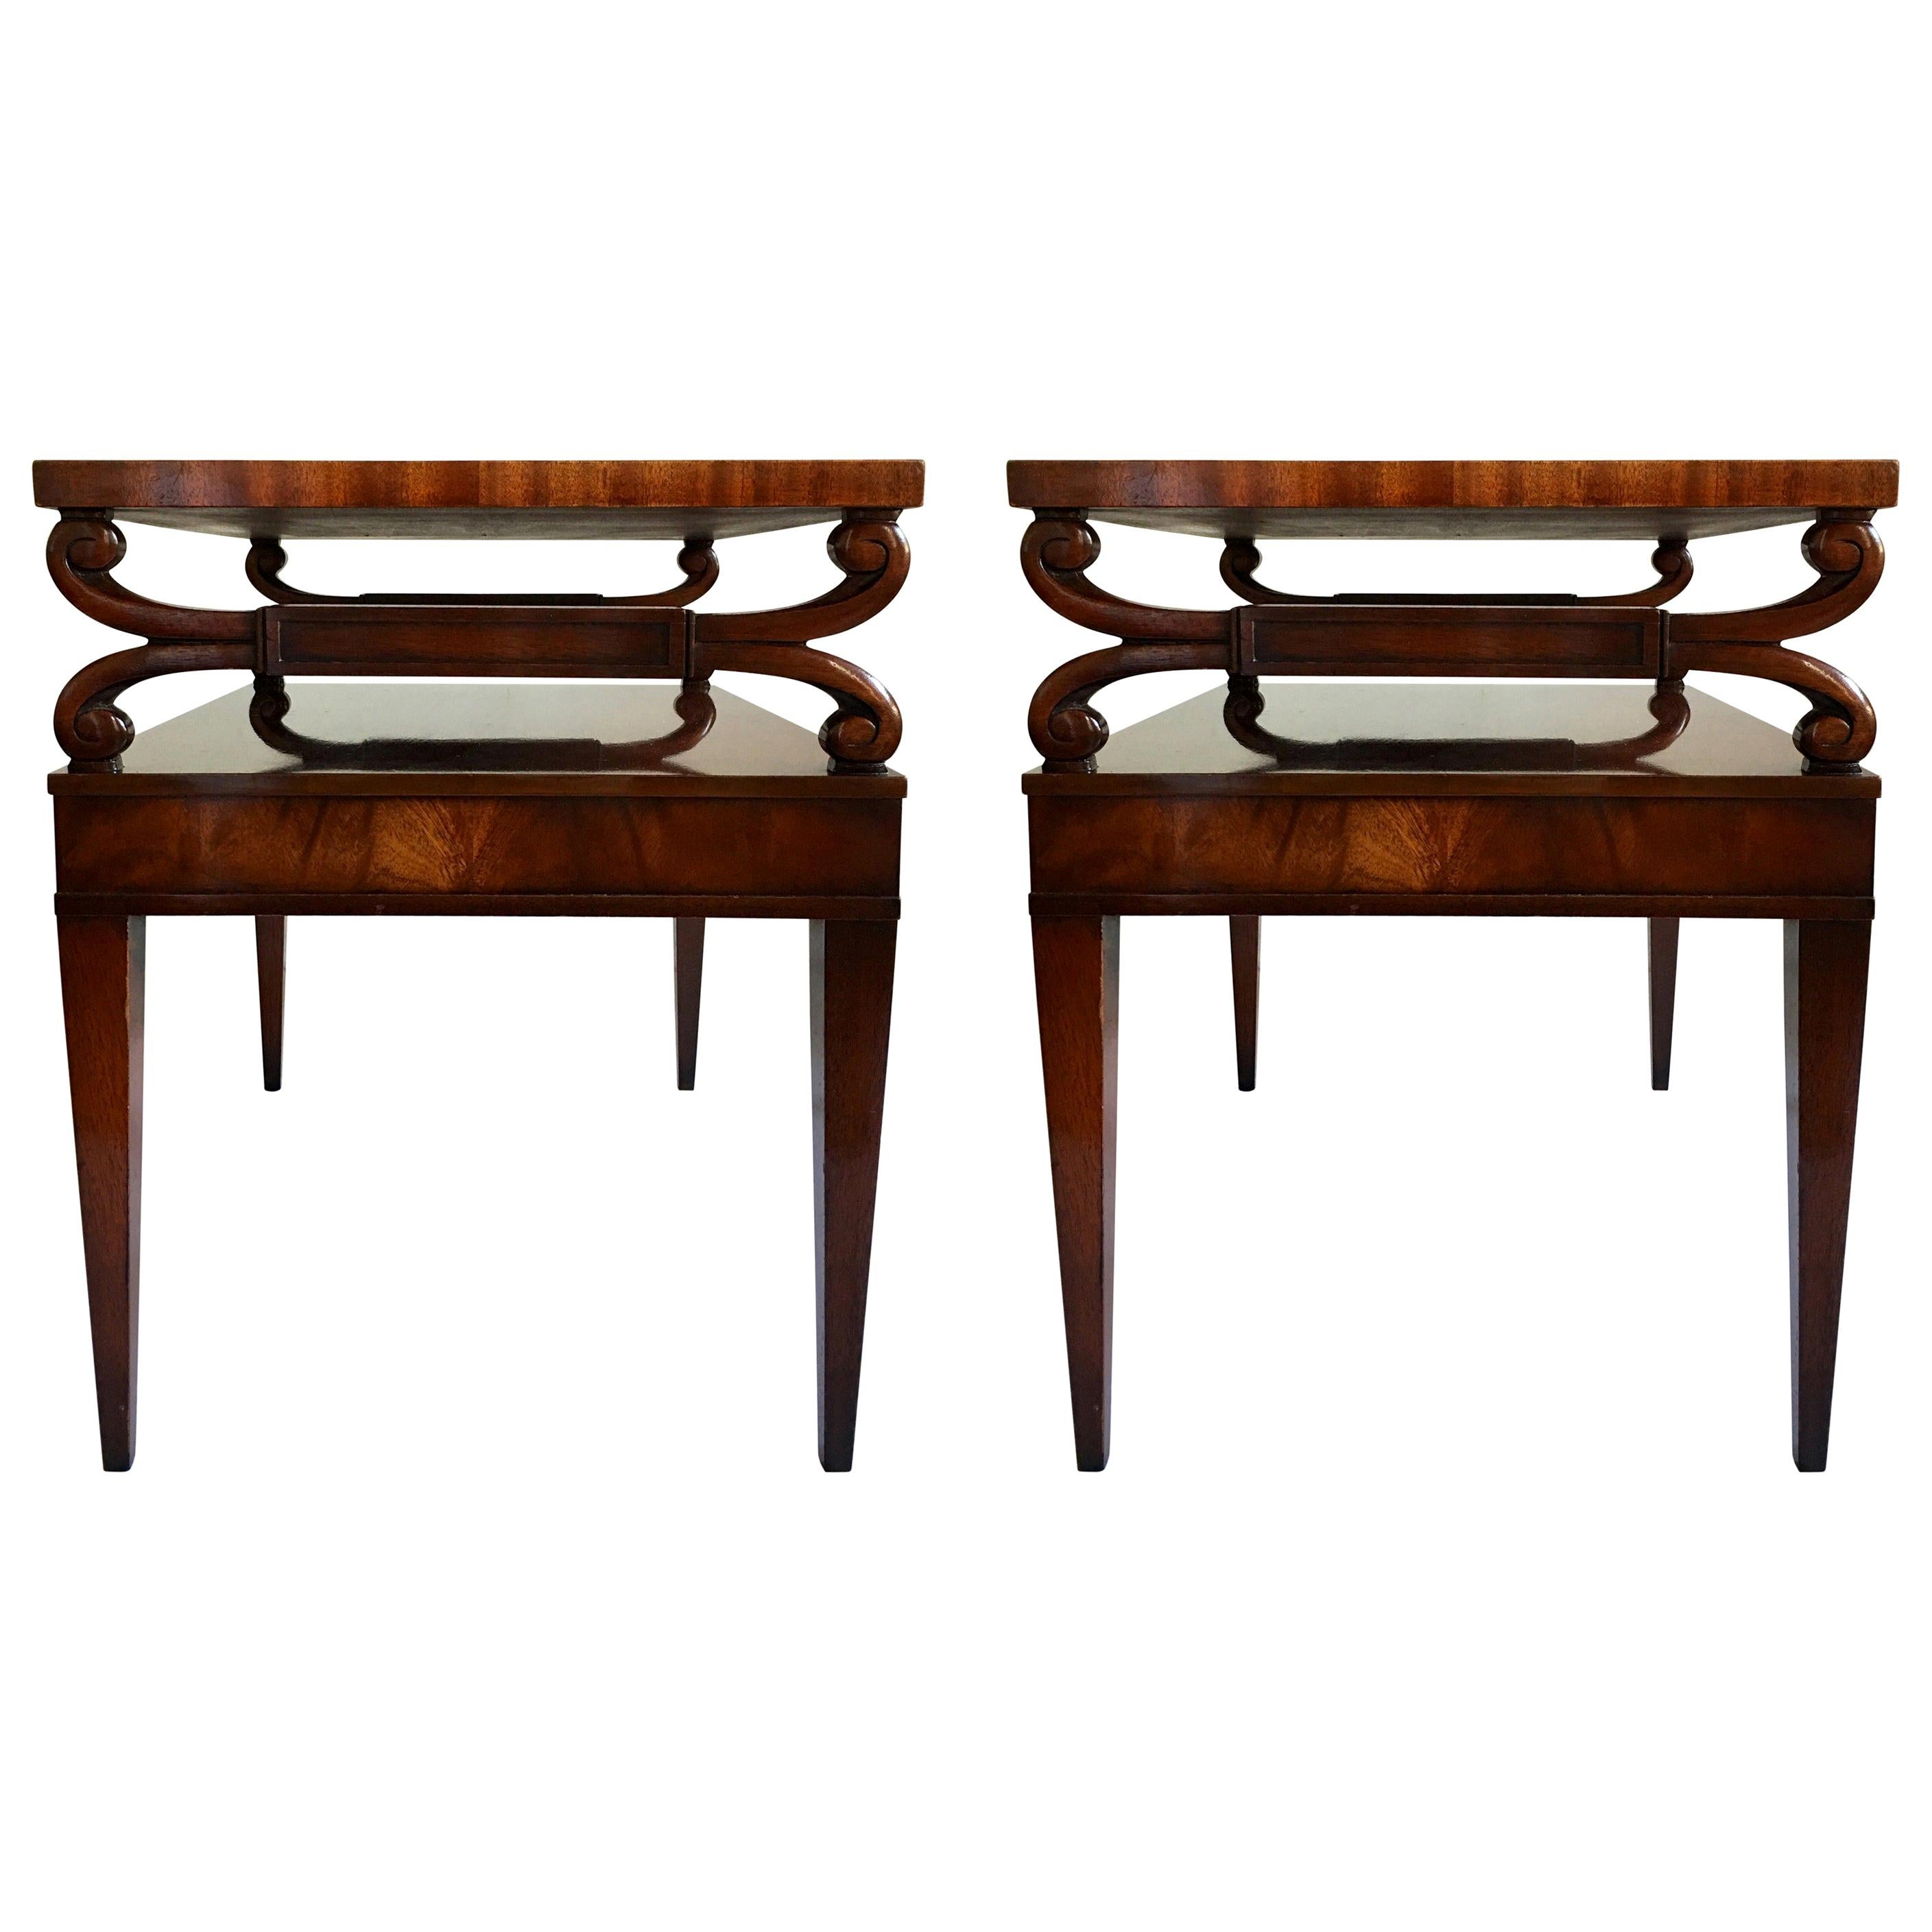 Midcentury Mahogany Scrolled Leather End Side Tables by Weiman, Pair